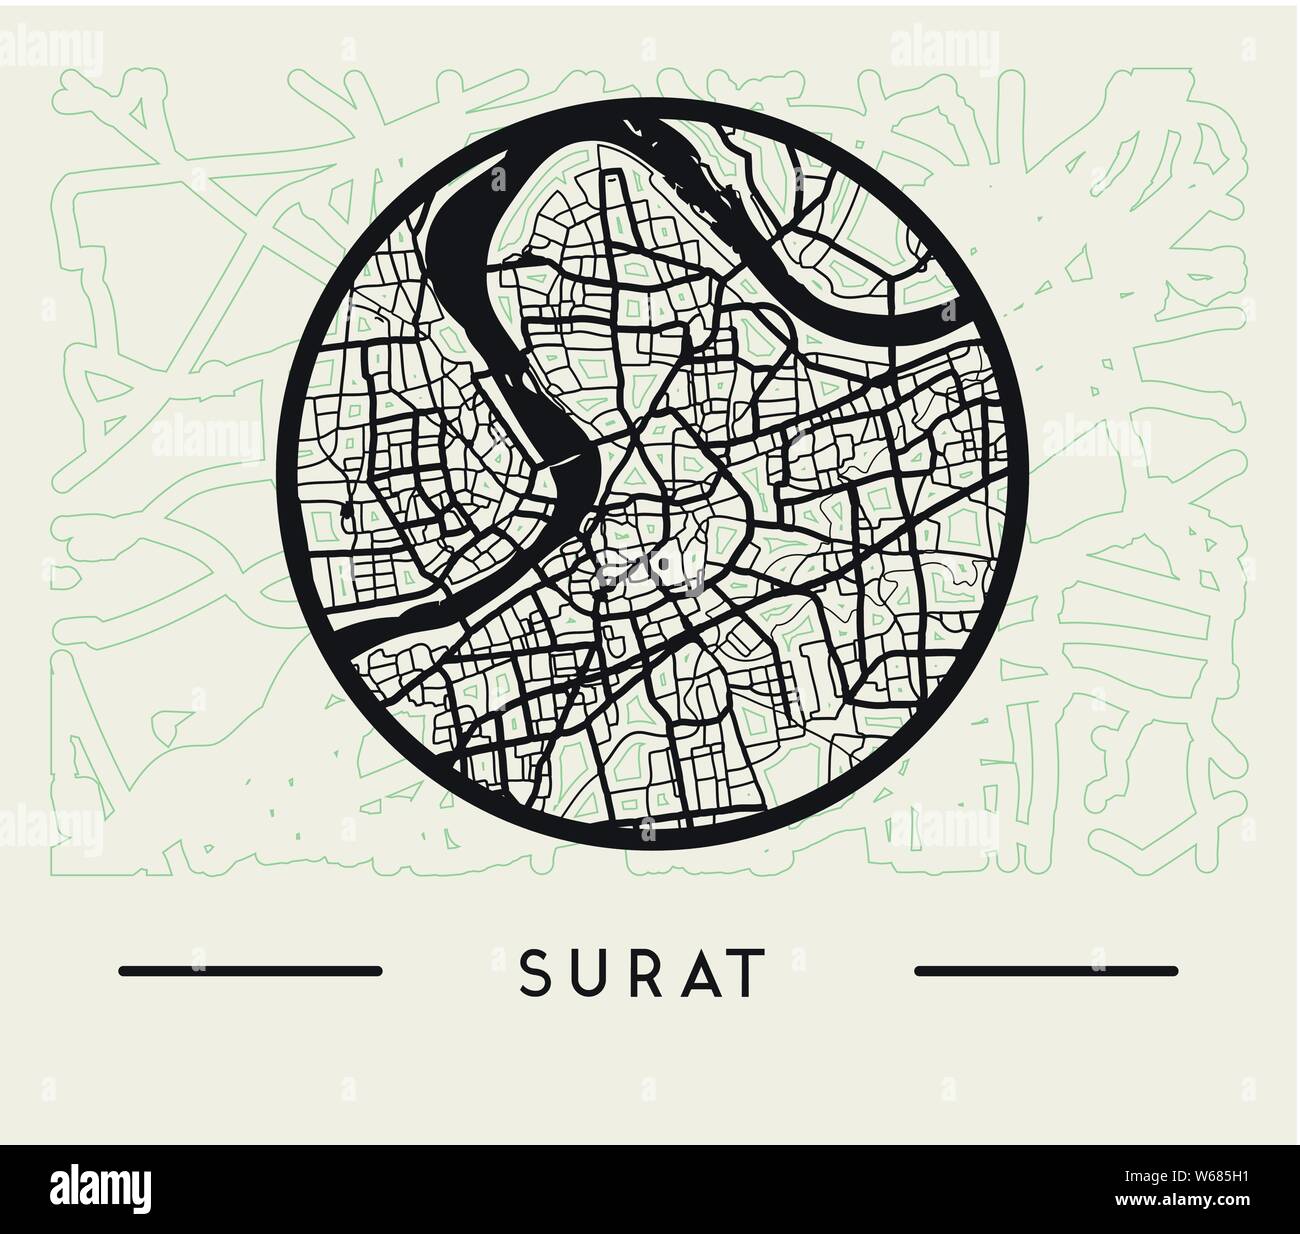 Abstract Surat City Map - Illustration as EPS 10 File Stock Vector